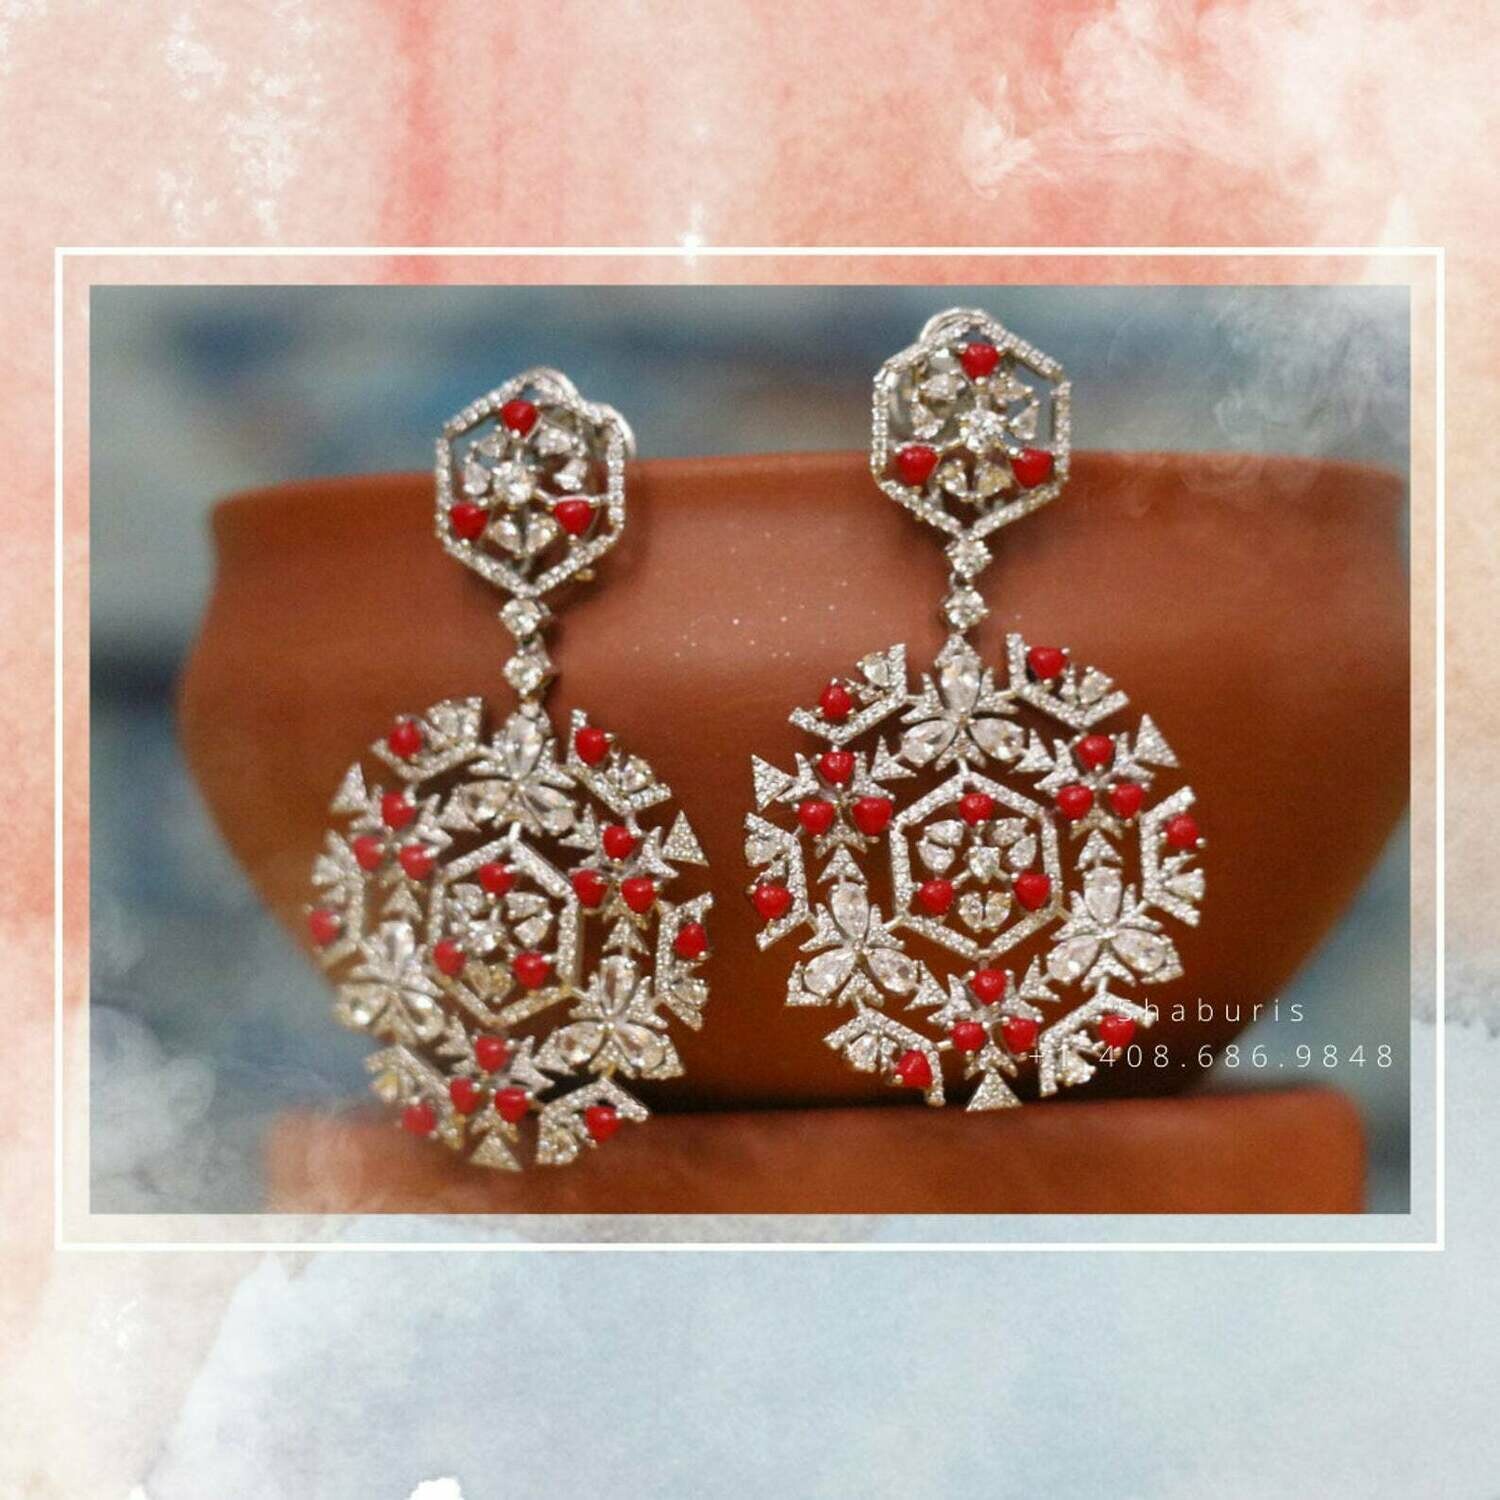 Coral Pure Silver Jewelry Indian,Cocktail Earrings,Fashion Jewelry in Silver,Indian Earrings,Indian Jewelry,High End Jewelry-NIHIRA-SHABURIS